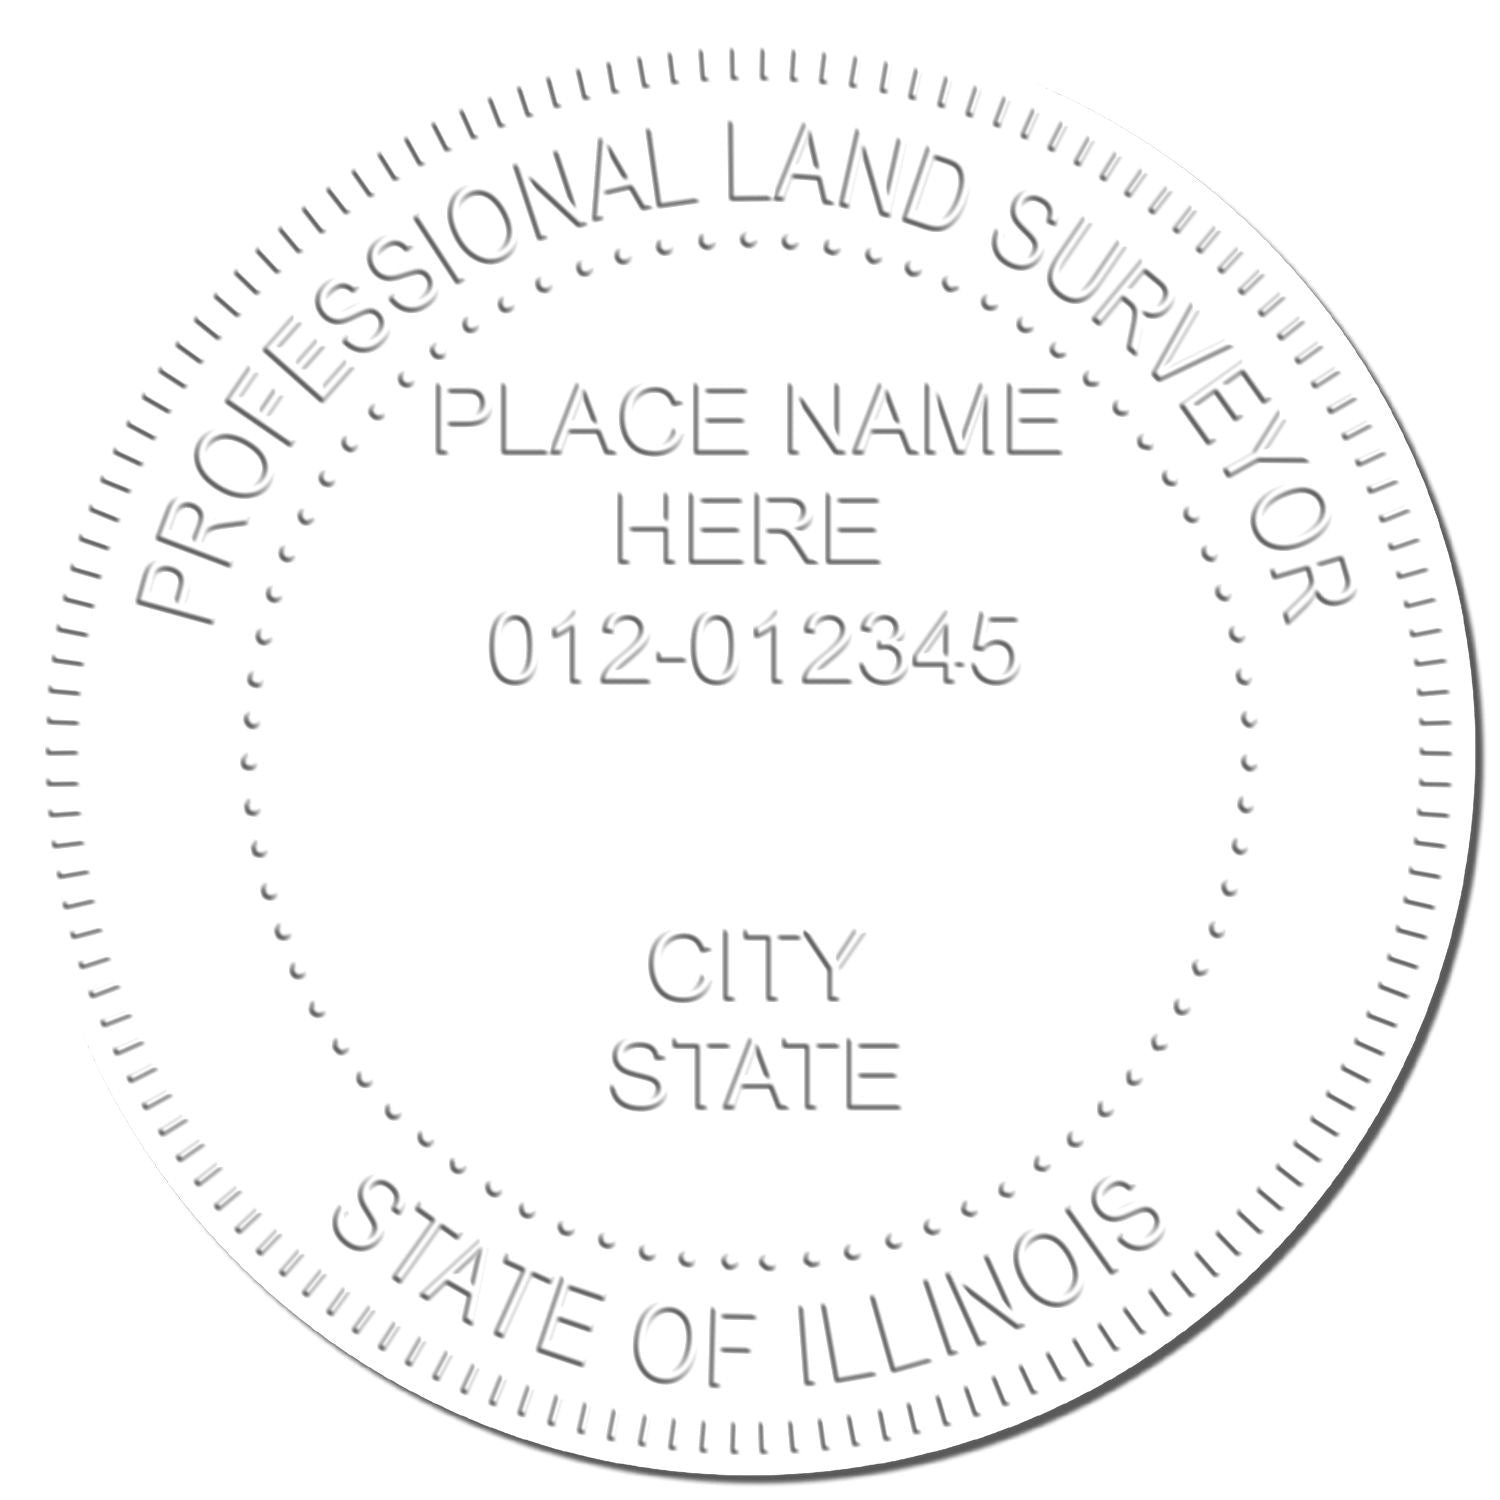 This paper is stamped with a sample imprint of the Long Reach Illinois Land Surveyor Seal, signifying its quality and reliability.